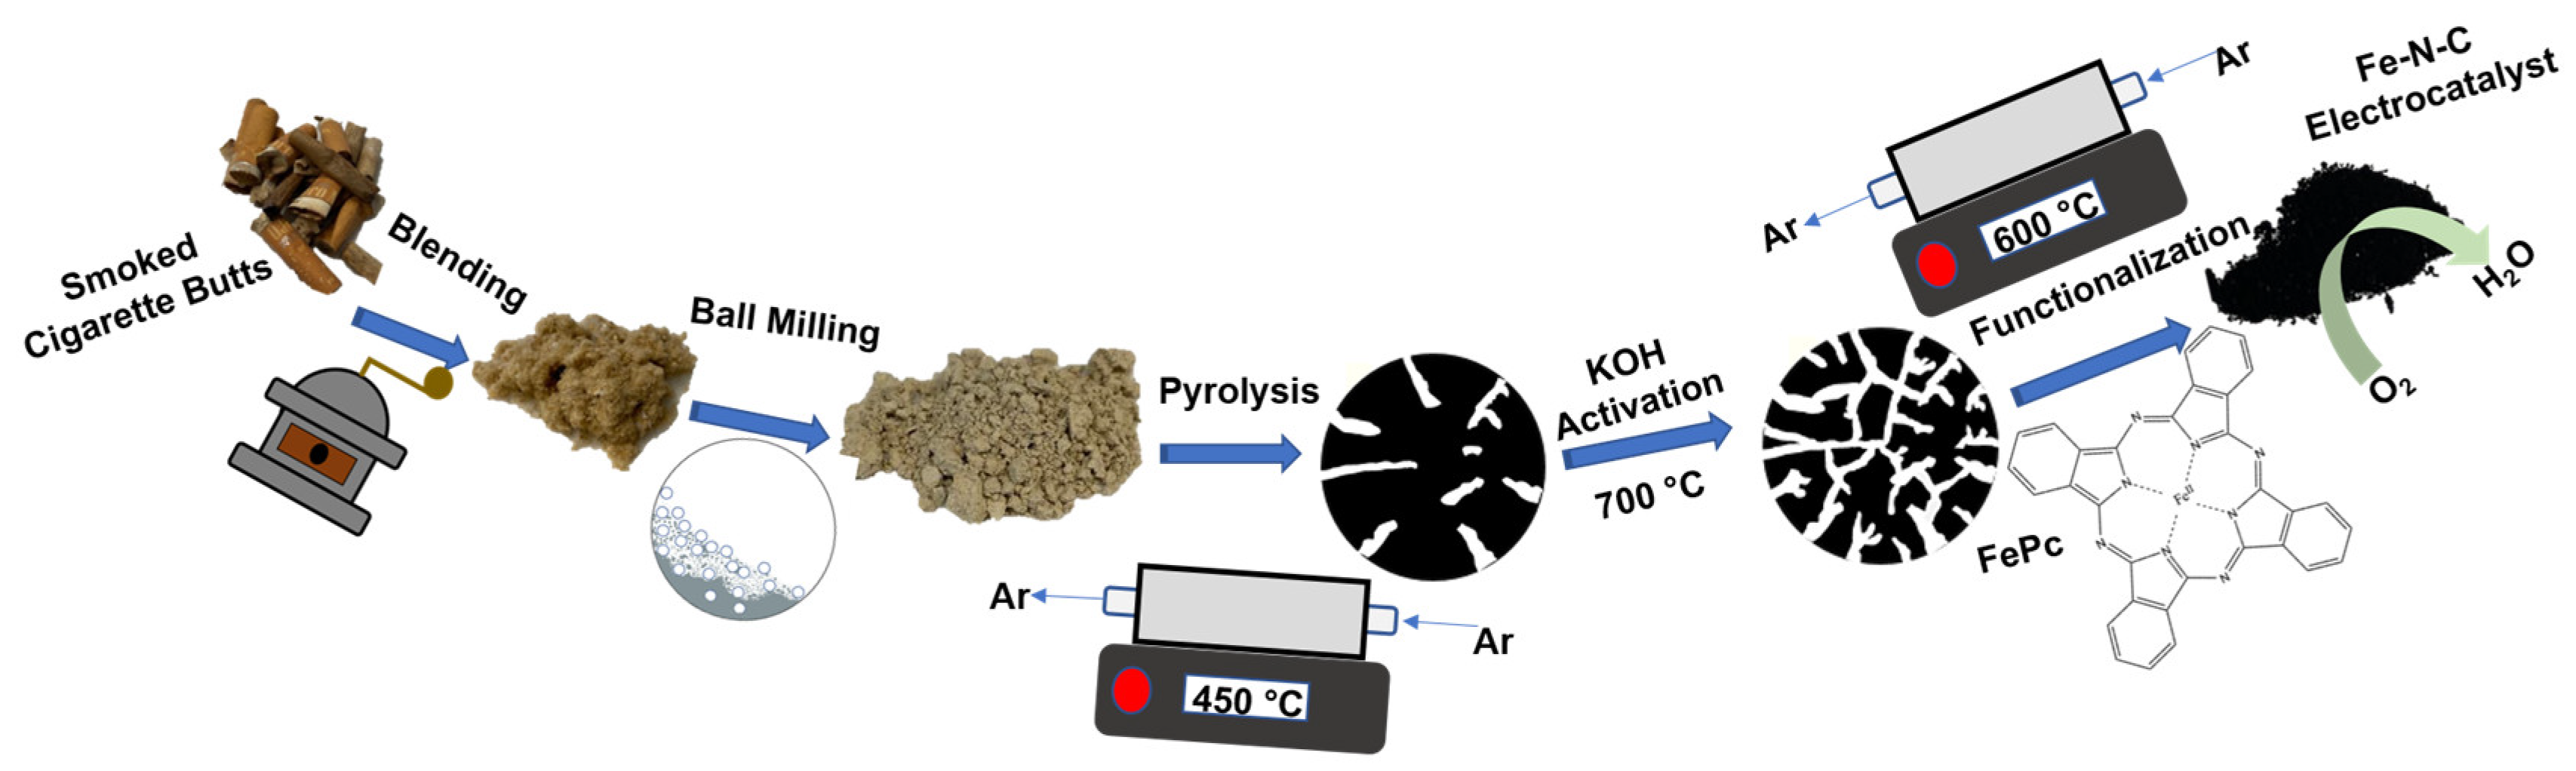 Catalysts | Free Full-Text | to Environment into and Butts: Transformation in Metal-Free New Life Electrocatalysts Reaction Waste Neutral Cigarette Alkaline Oxygen for Acid, Giving Platinum Reduction Group